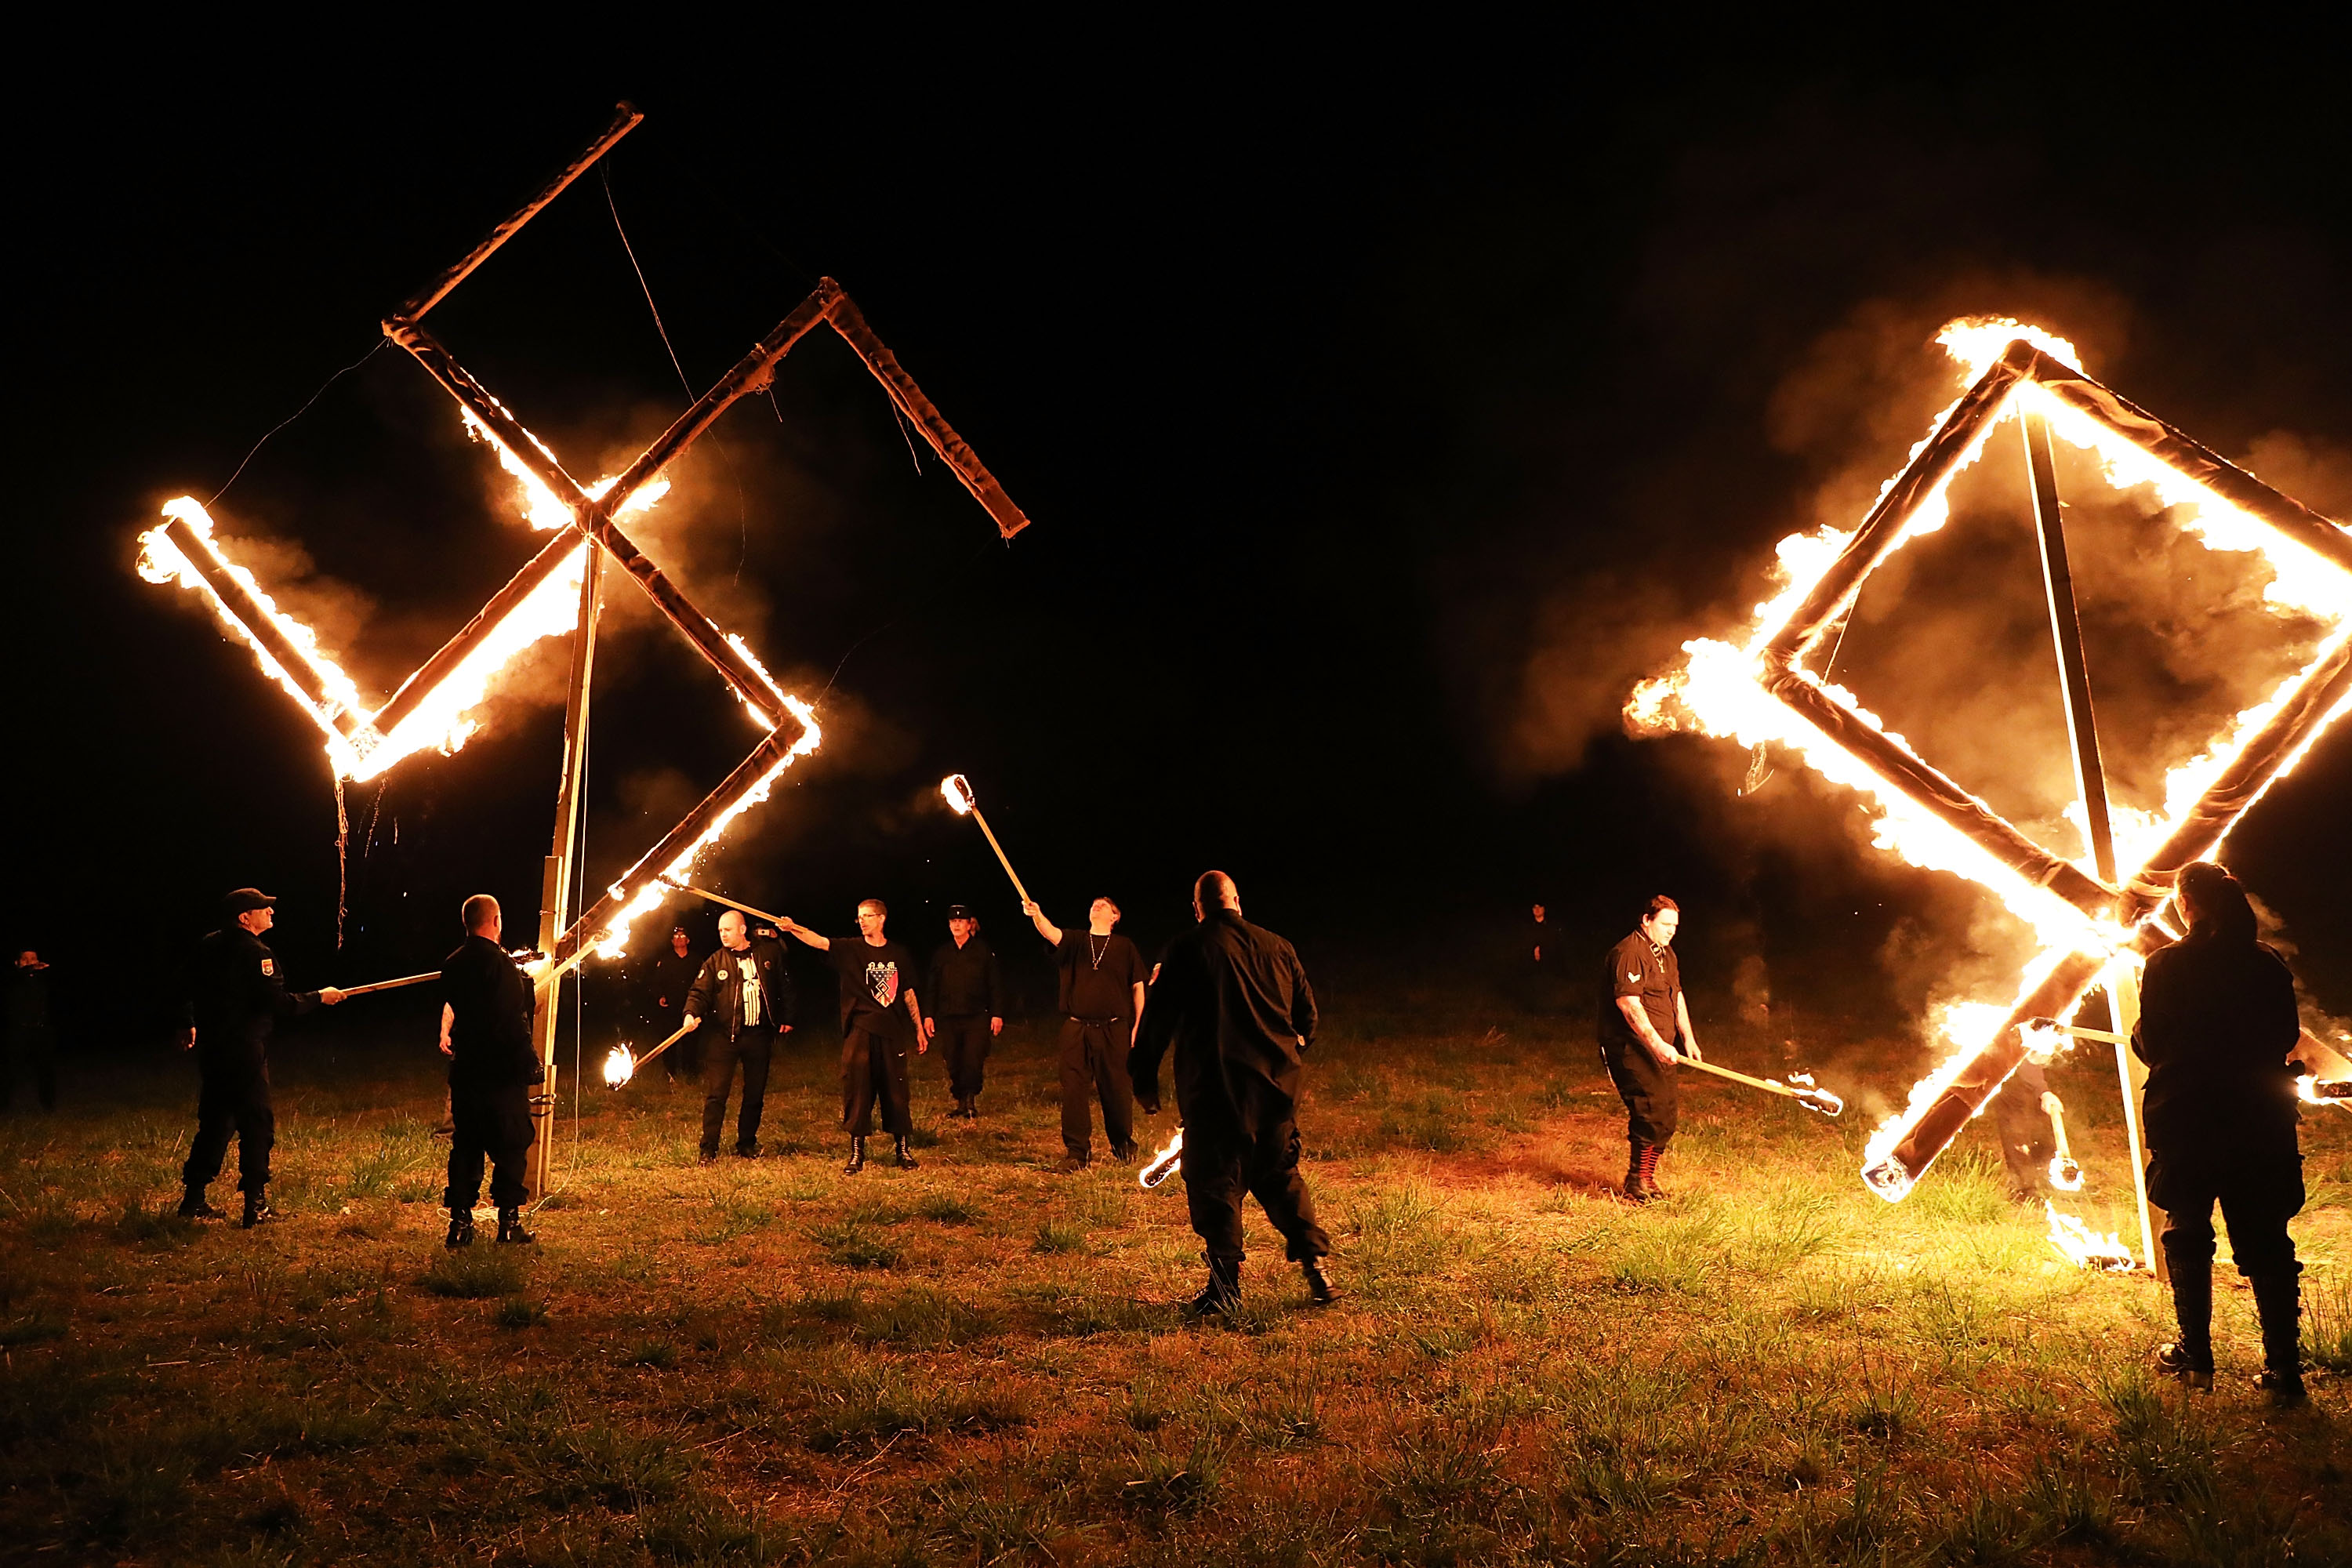 Members of the National Socialist Movement, one of the largest neo-Nazi groups in the US, hold a swastika burning after a rally on April 21, 2018 in Draketown, Georgia. Community members had opposed the rally in Newnan and came out to embrace racial unity in the small Georgia town. Fearing a repeat of the violence that broke out after Charlottesville, hundreds of police officers were stationed in the town during the rally in an attempt to keep the anti racist protesters and neo-Nazi groups separated (Spencer Platt - Getty Images)